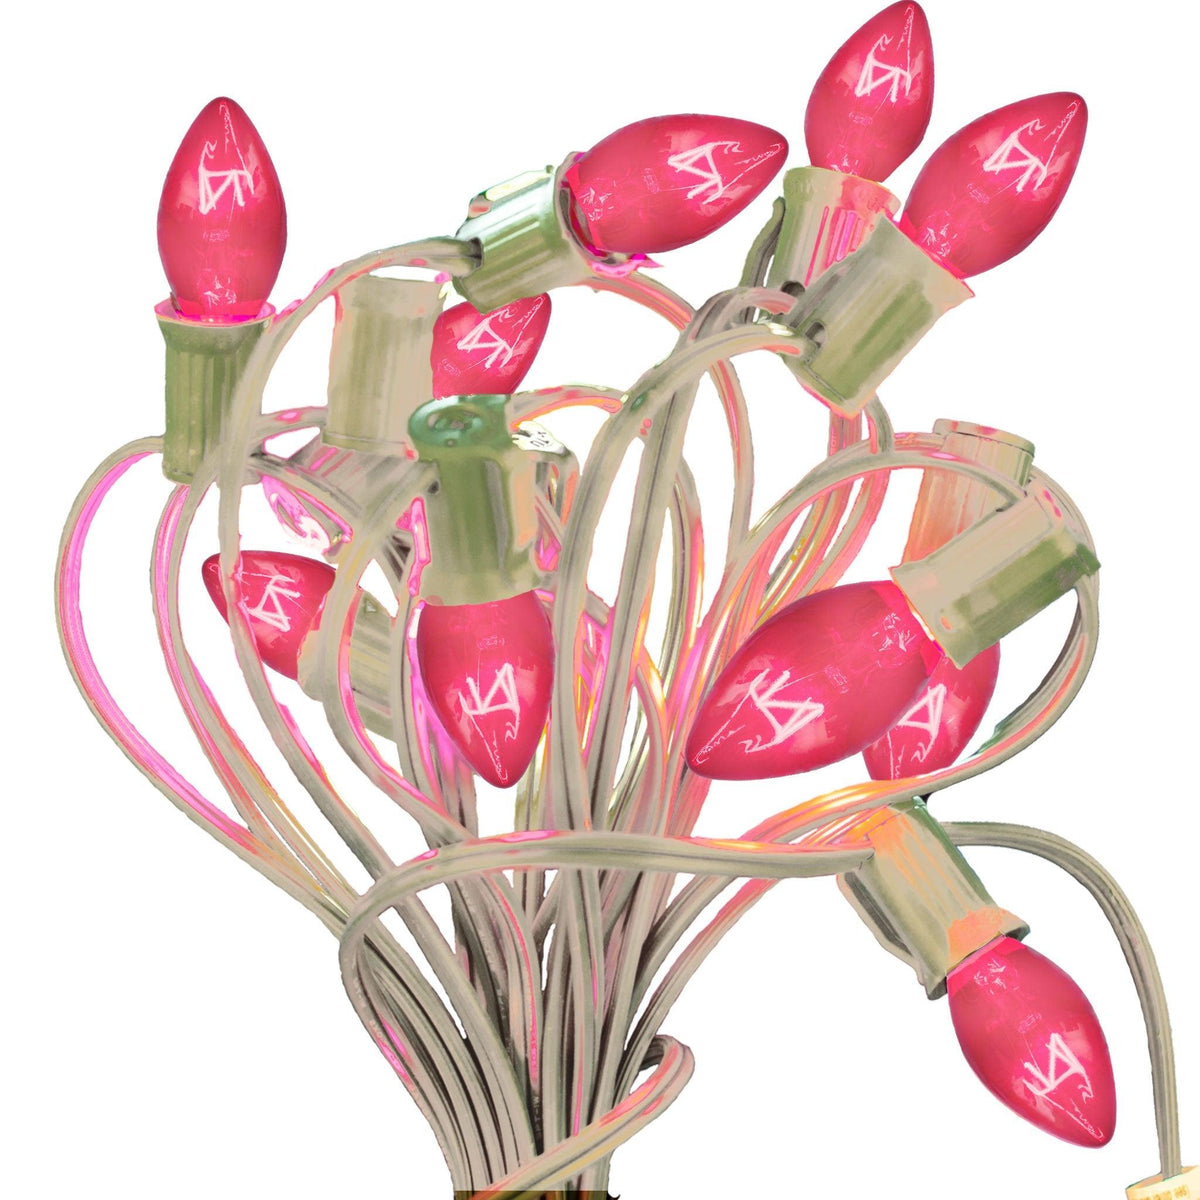 Shop for 25FT Long C7/C9 Candelabra Style Pink Colored Outdoor String Lighting Sets with Cords Included at leedisplay.com